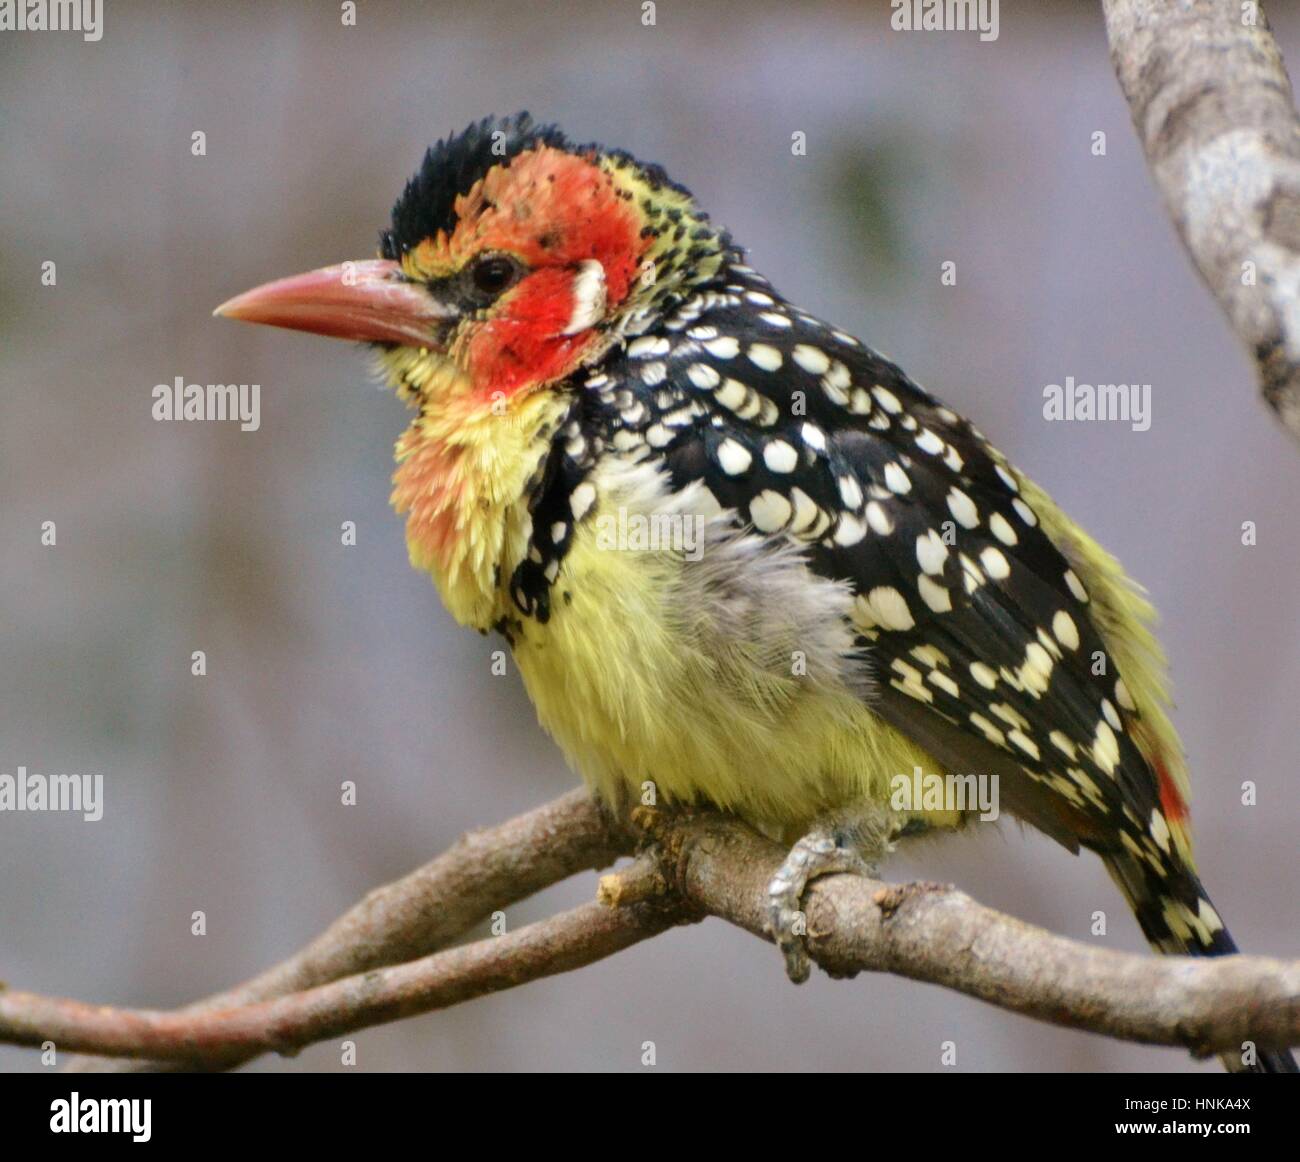 The red-and-yellow barbet (Trachyphonus erythrocephalus) is a species of African barbet found in eastern Africa. Stock Photo